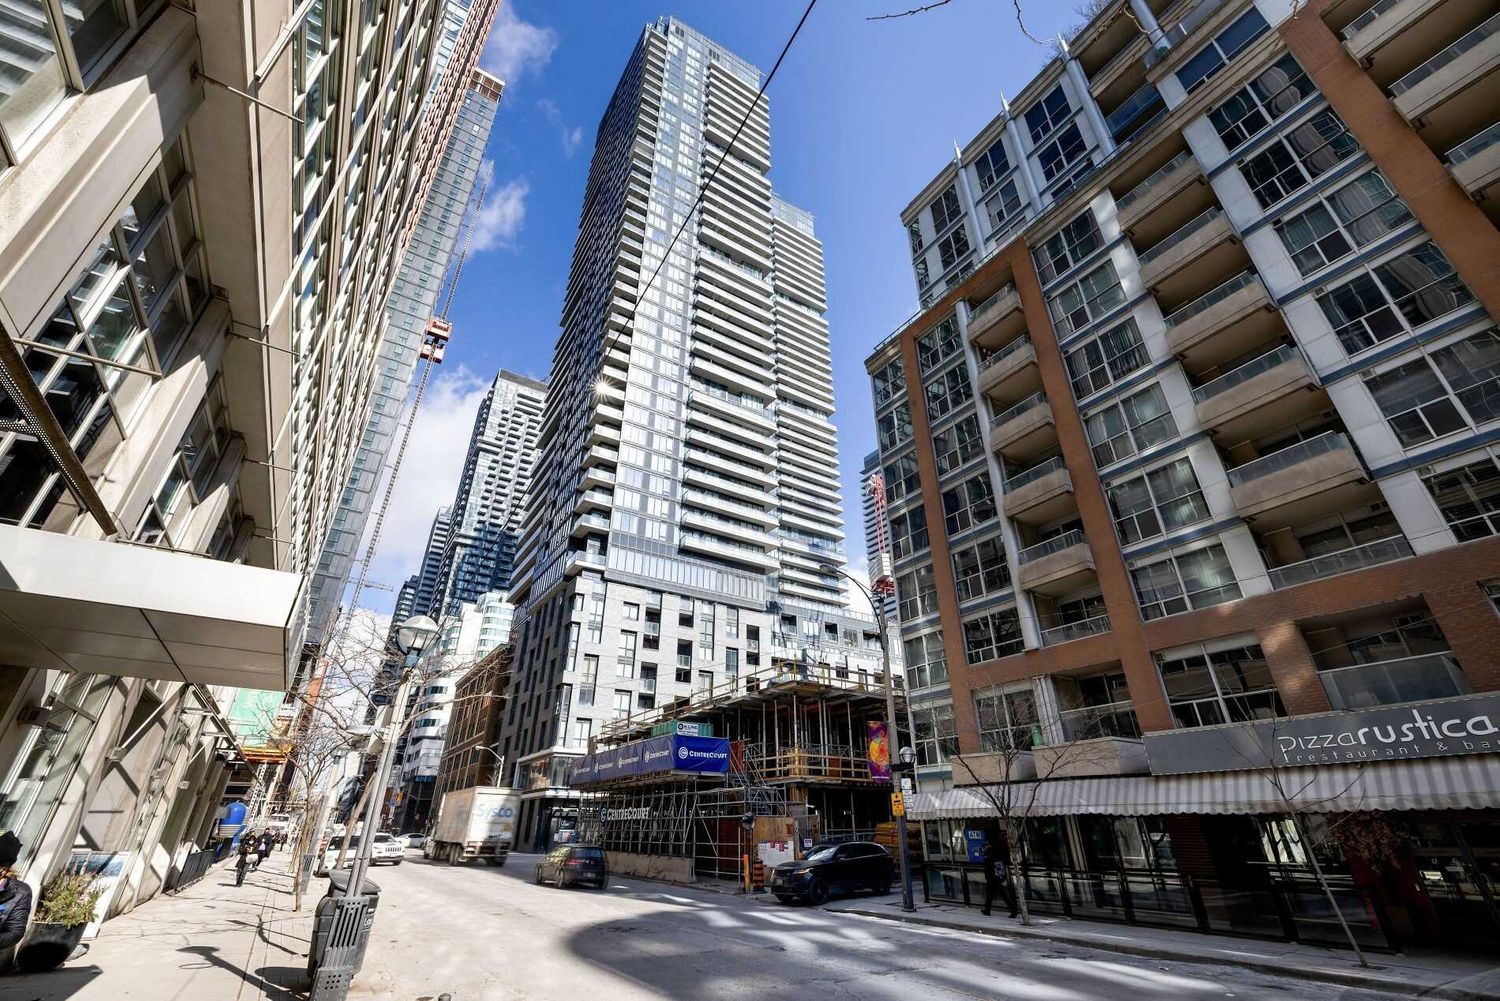 115-125 Blue Jays Way. King Blue Condos is located in  Downtown, Toronto - image #1 of 2